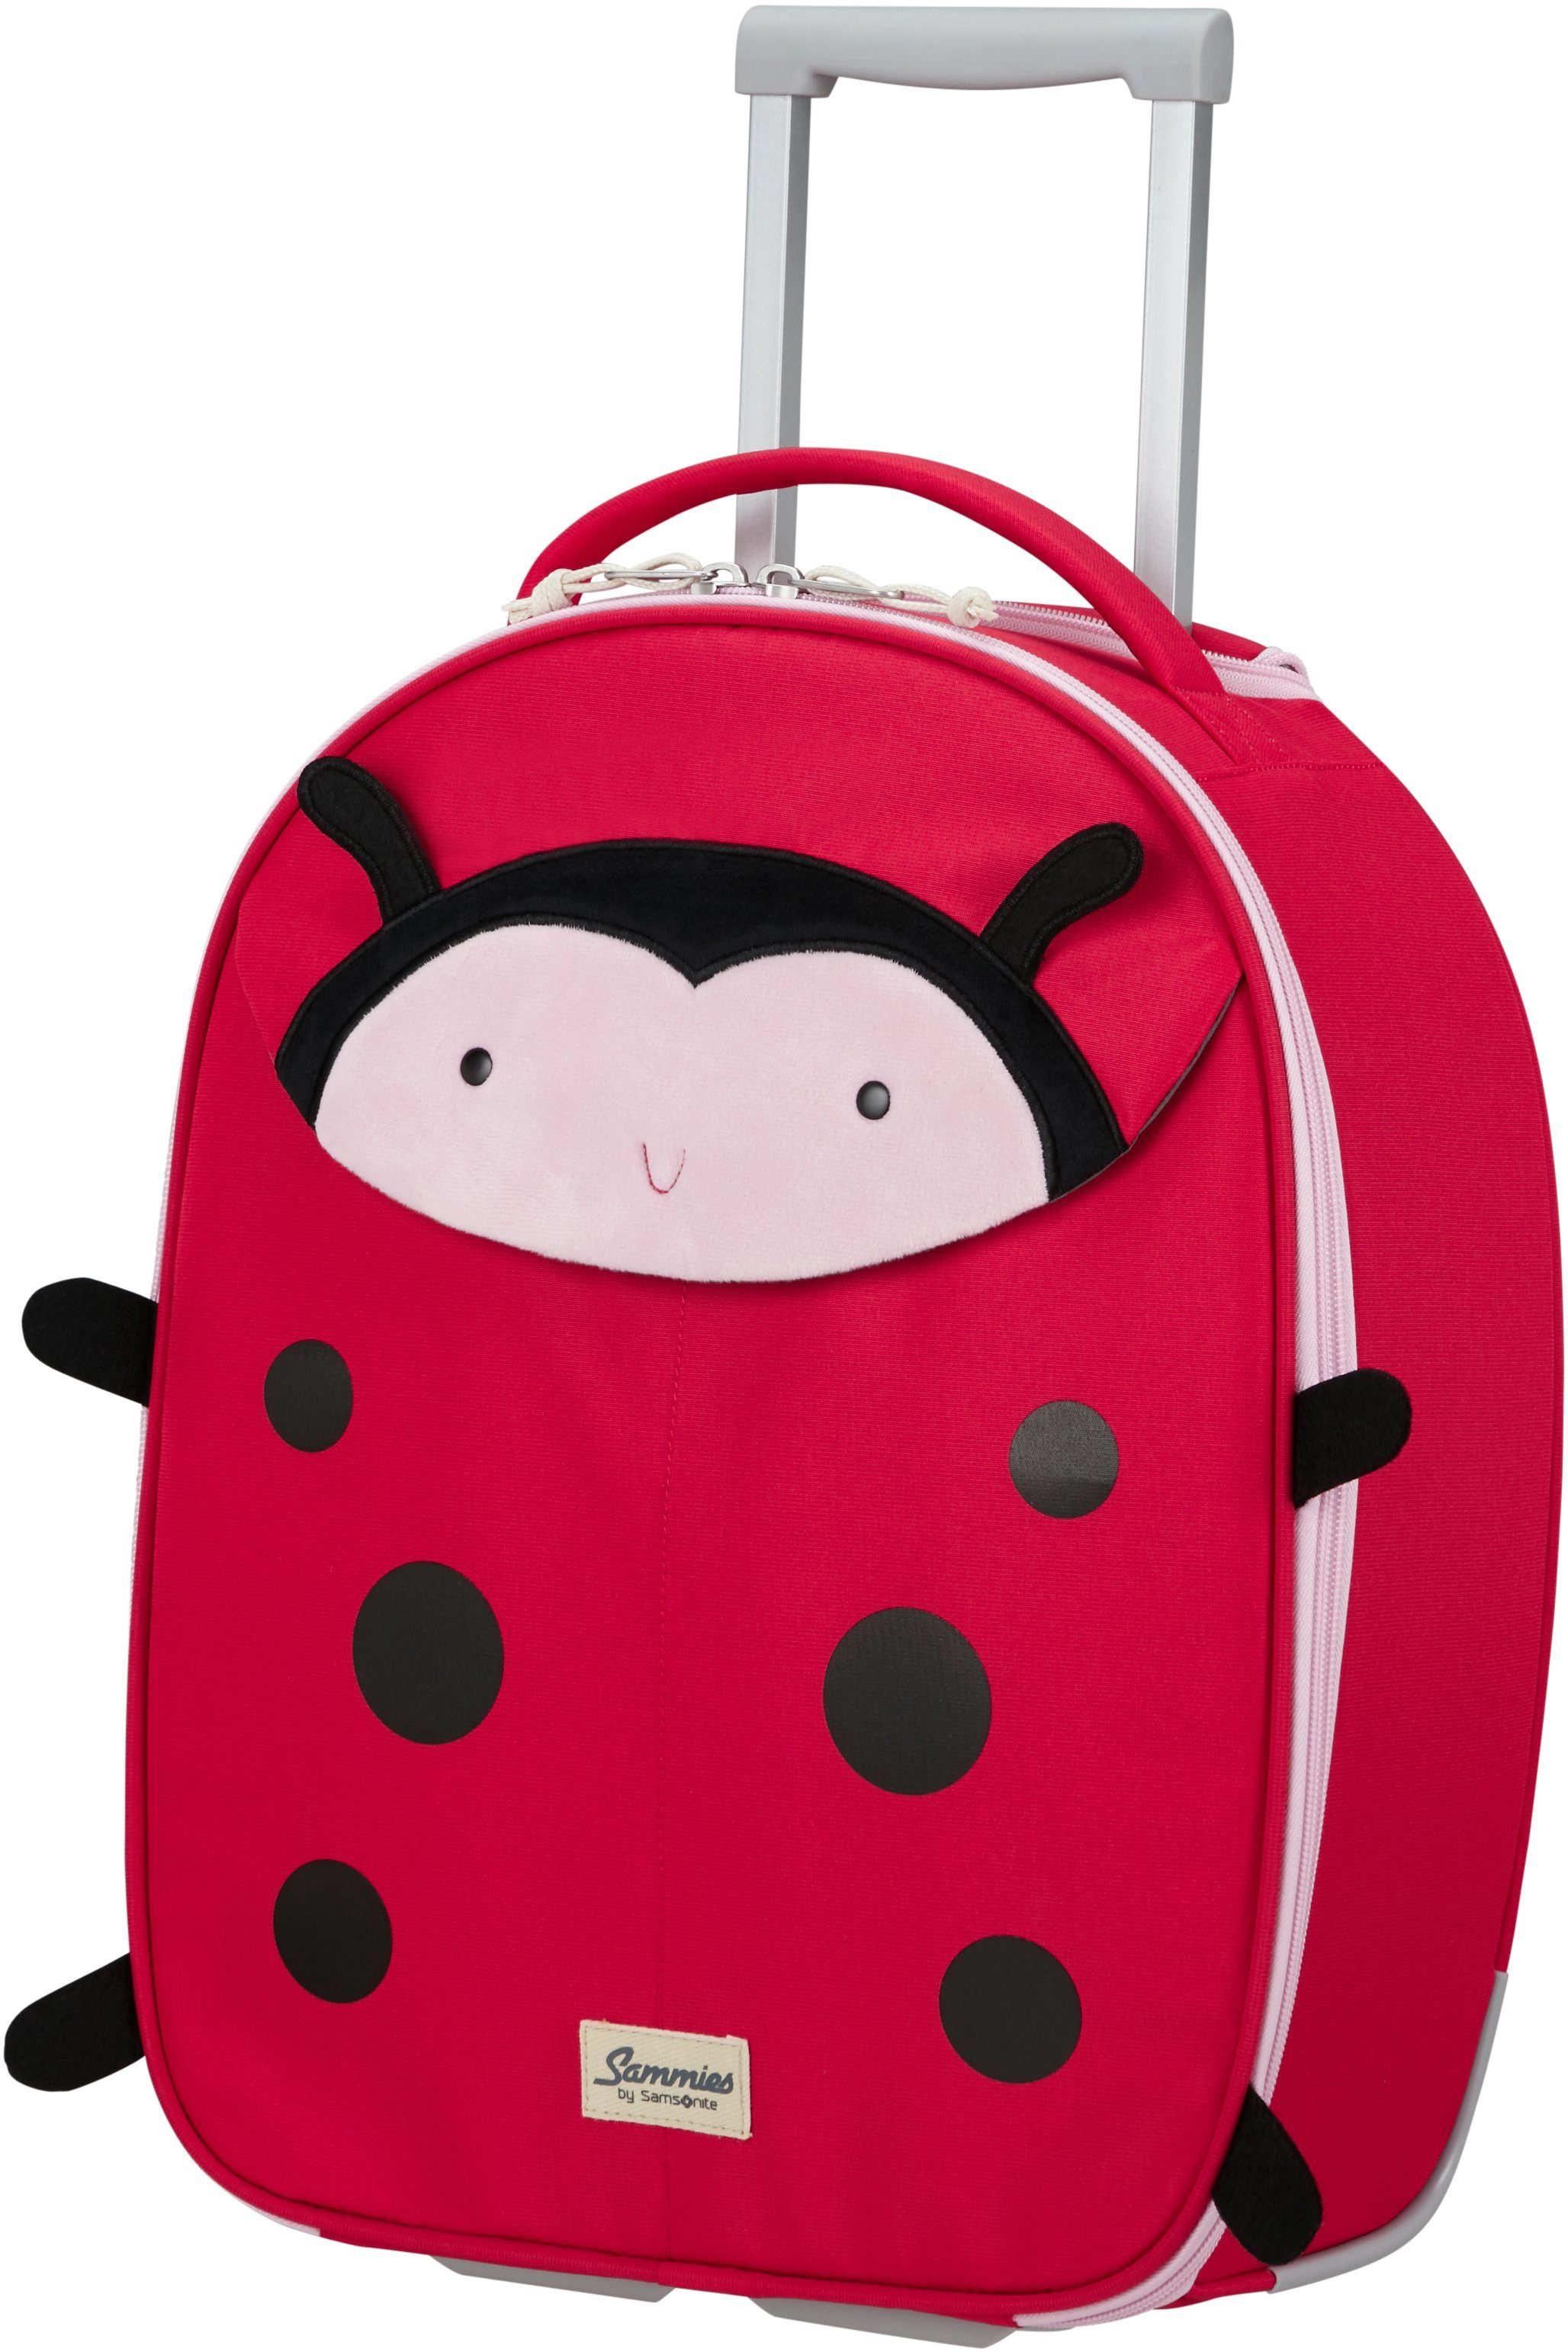 Sammies recyceltem ECO, Happy Kinderkoffer Rollen, Samsonite 2 aus Material Ladybug Lally,